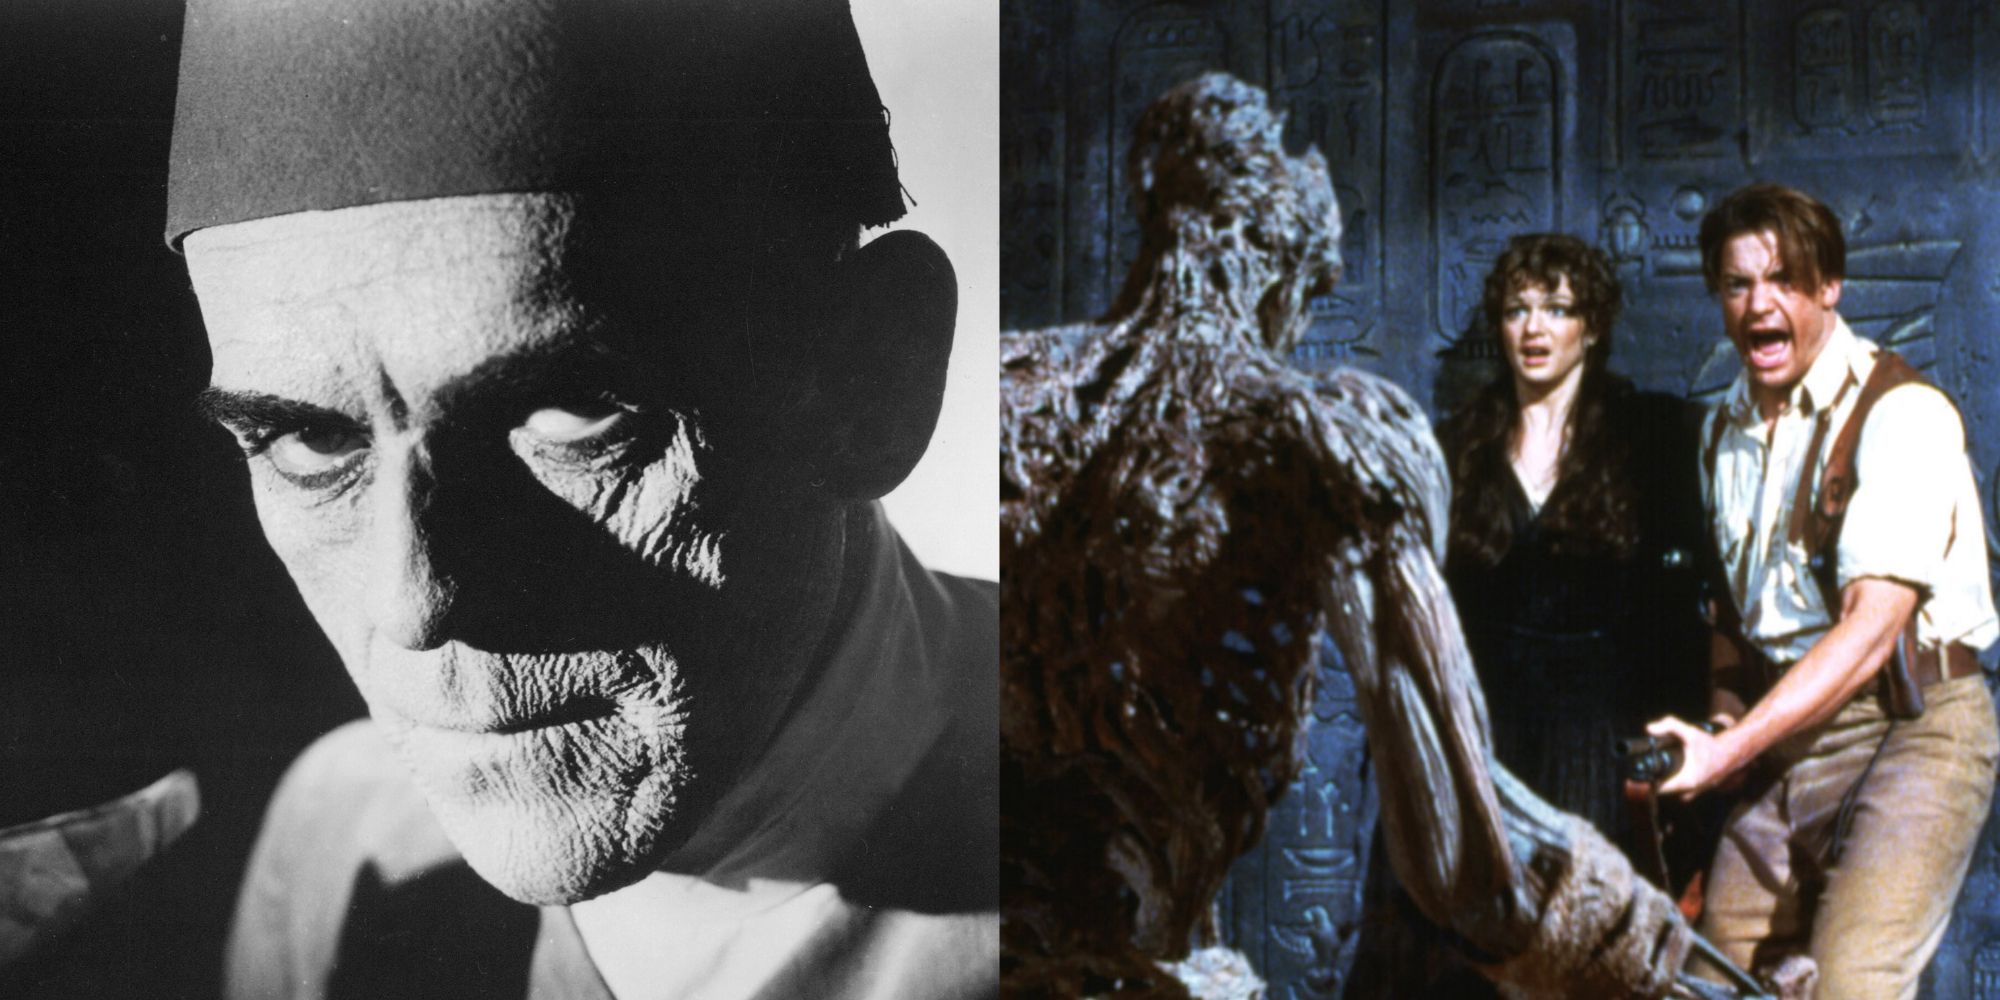 Stills from The Mummy 1932 and 1999